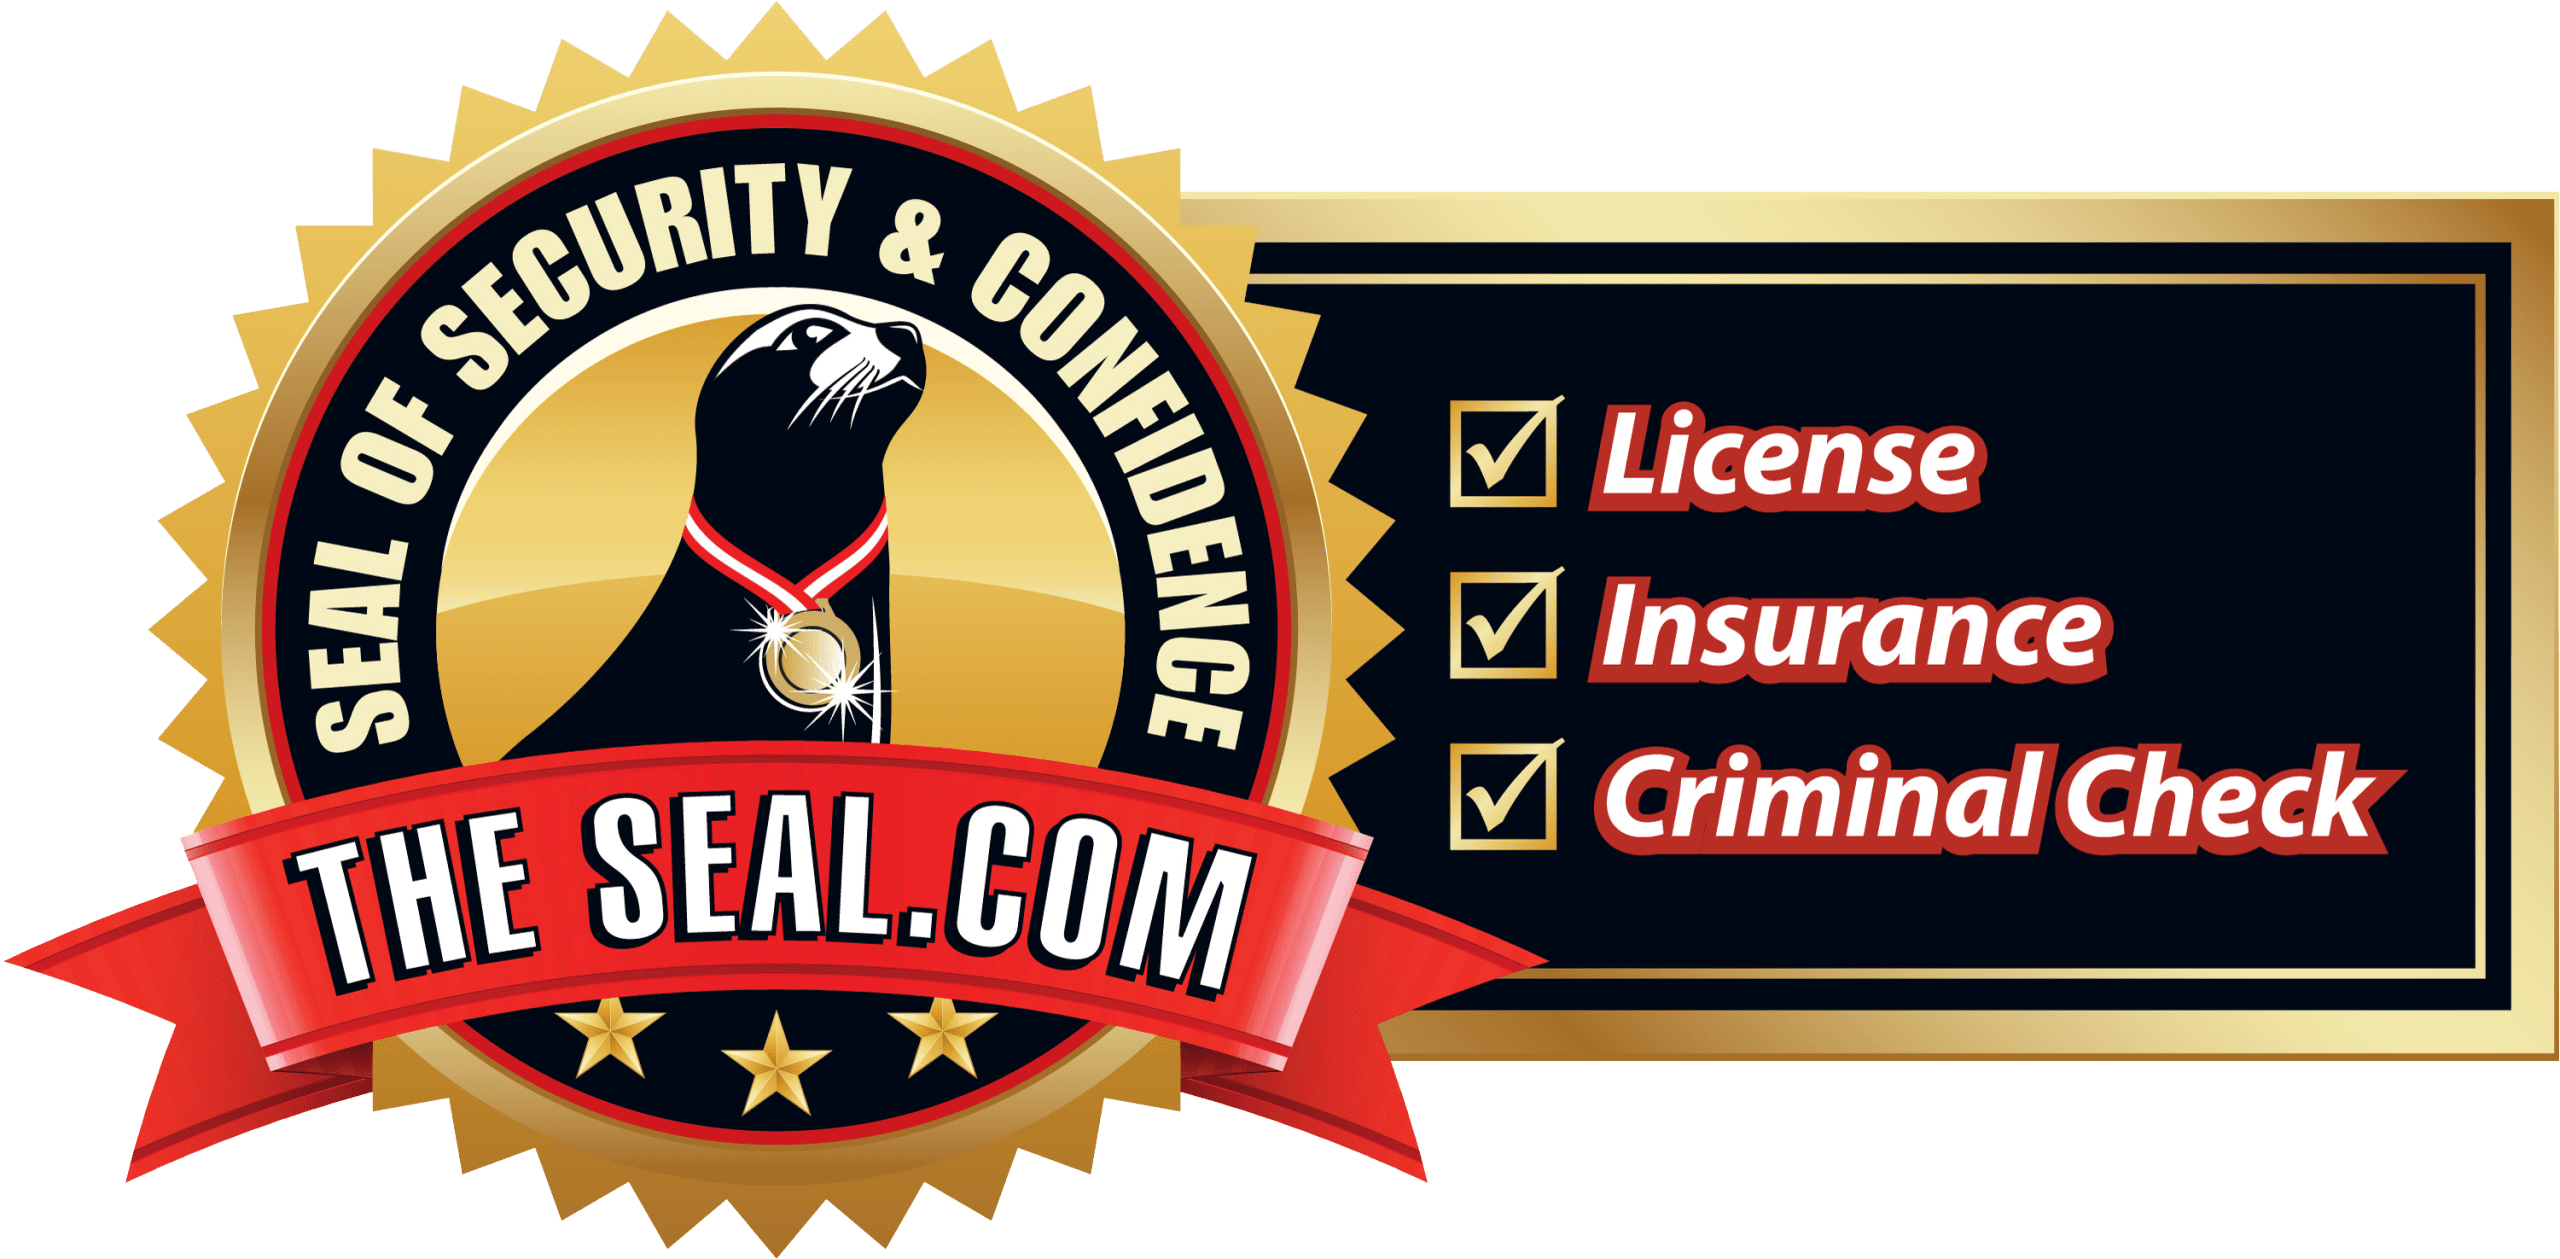 Seal of security & confidence